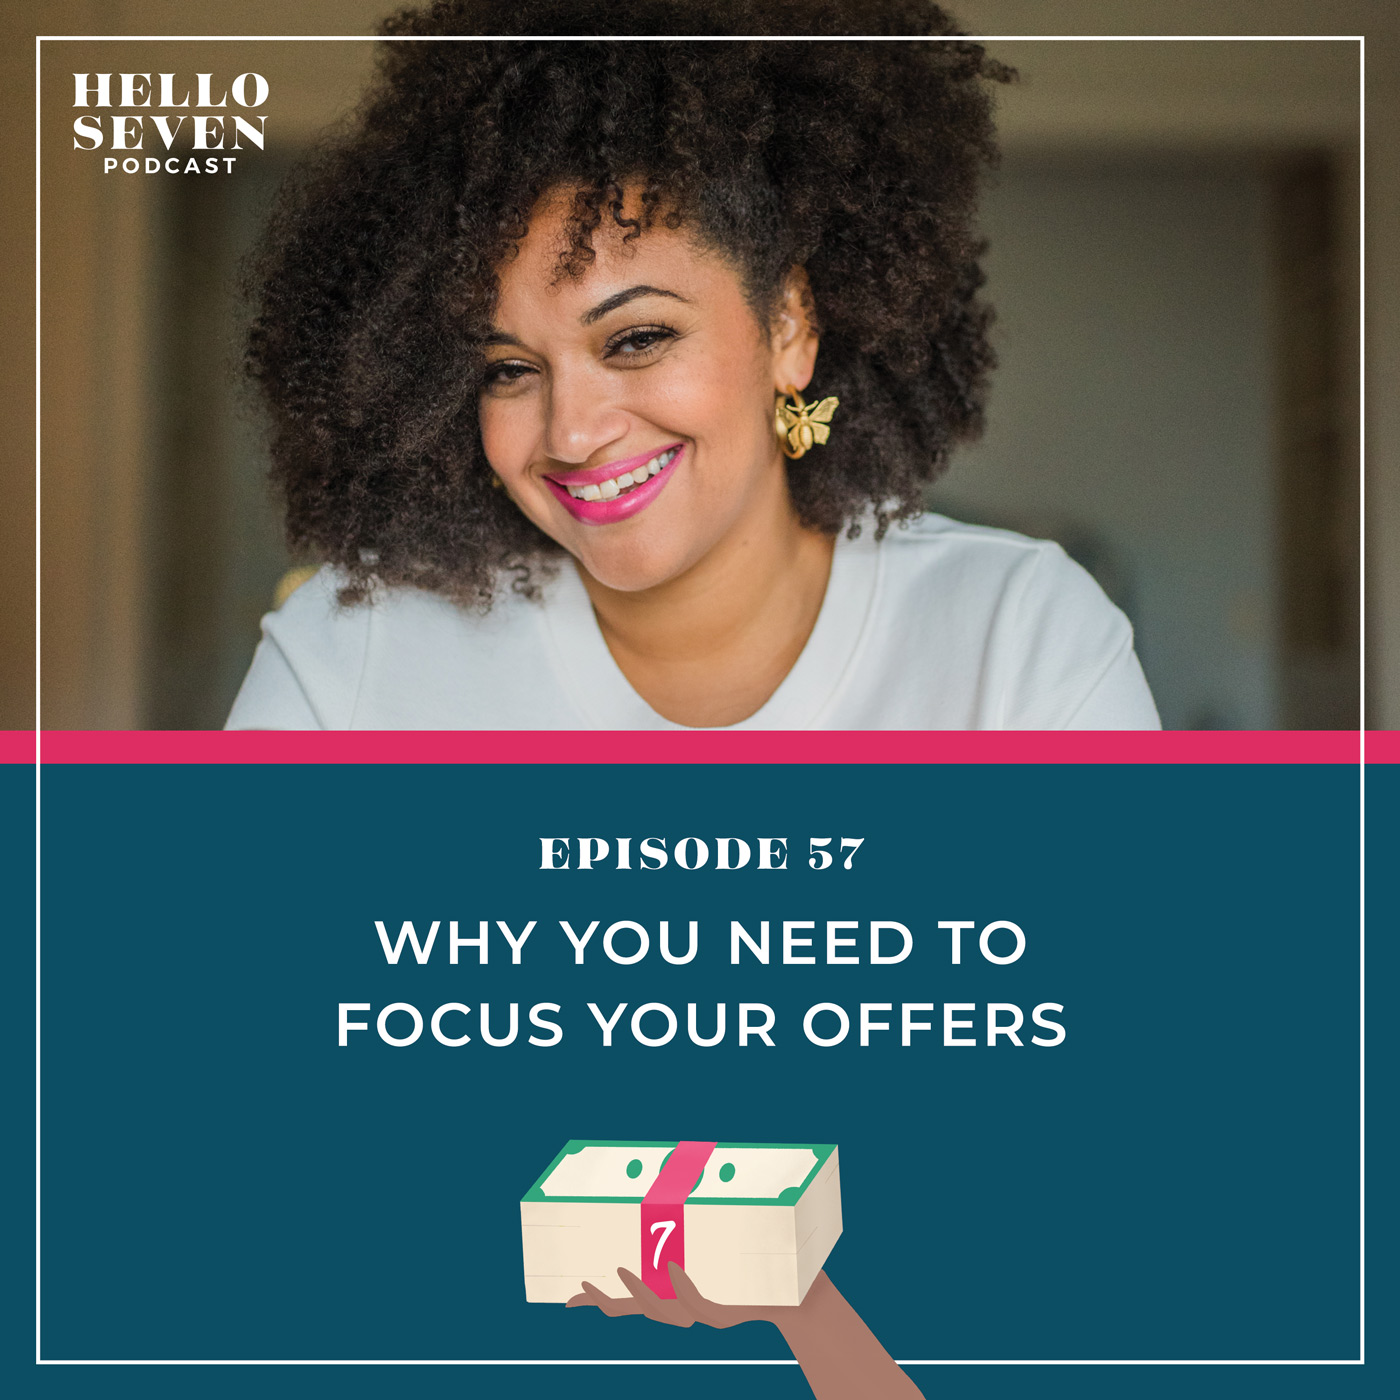 Why You Need to Focus Your Offers